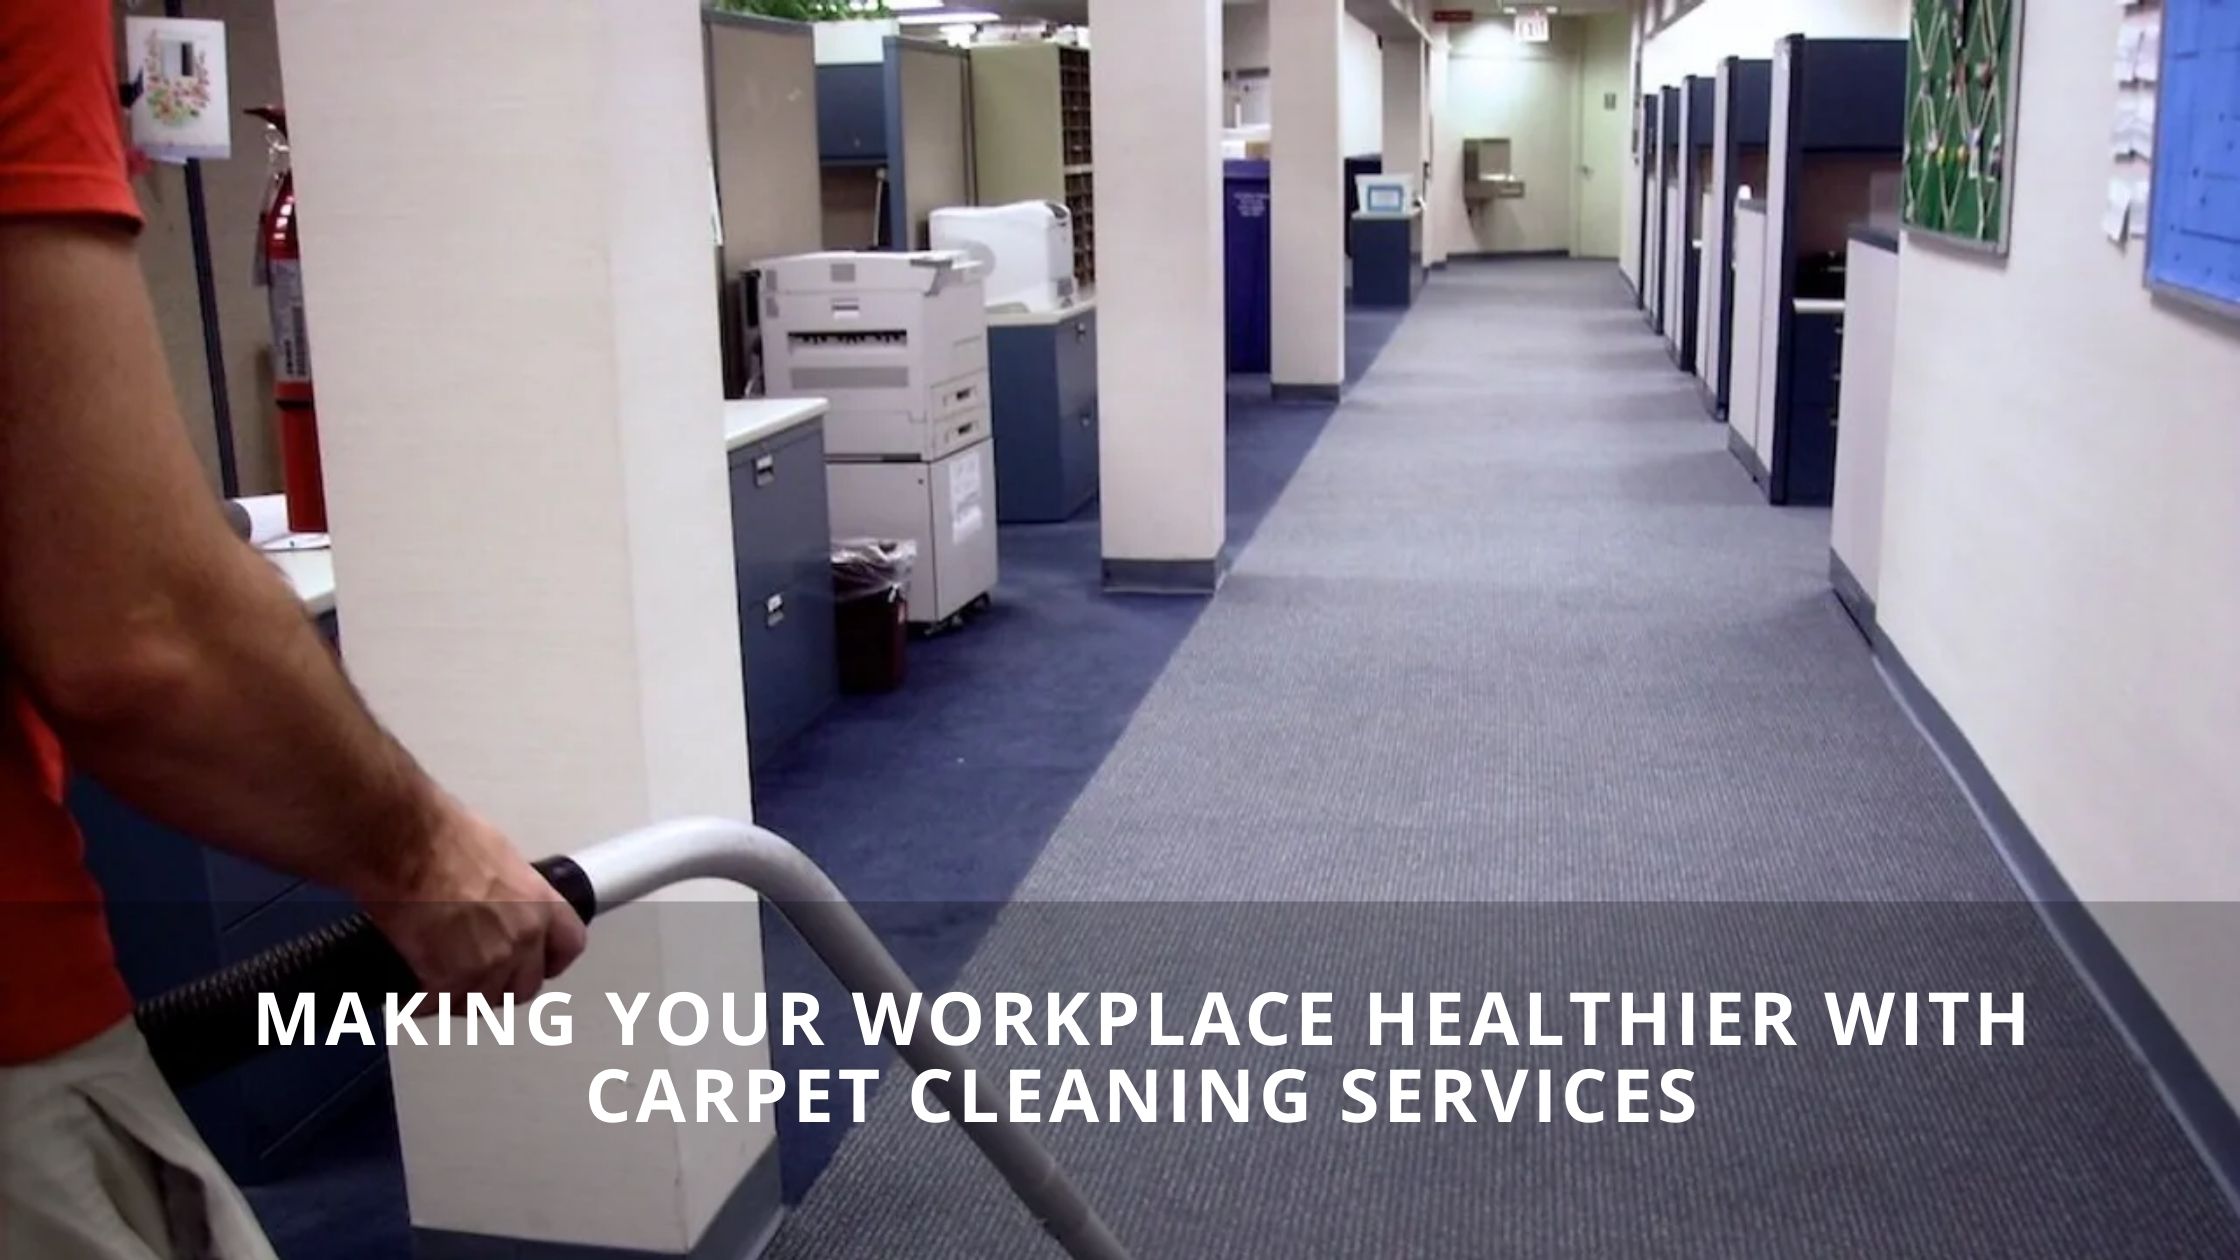 Making Your Workplace Healthier With Carpet Cleaning Services (1)